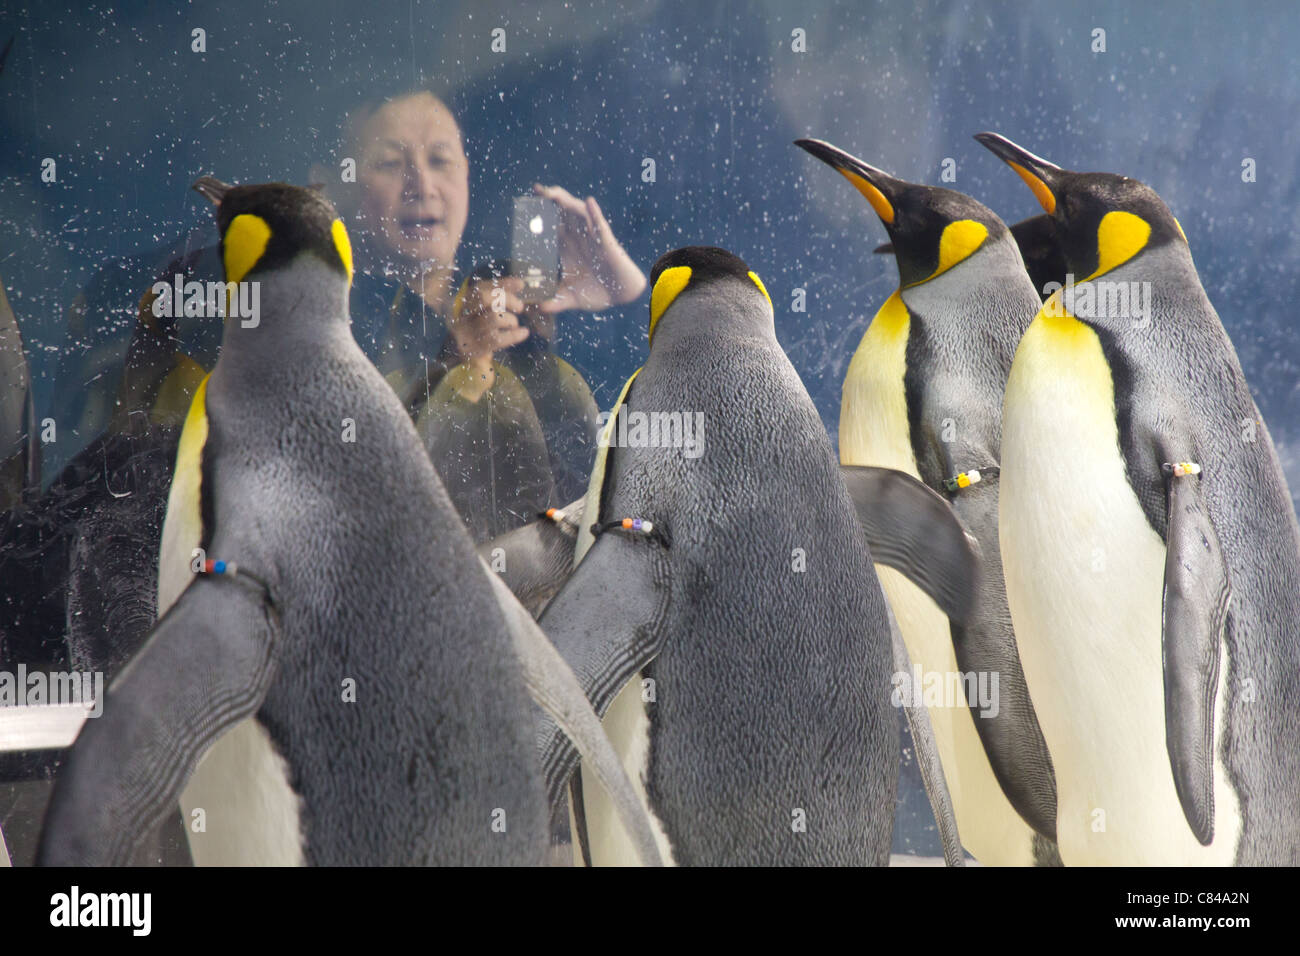 Emperor Penguins (Aptenodytes forsteri) being viewed by visitors to their enclosure. Stock Photo